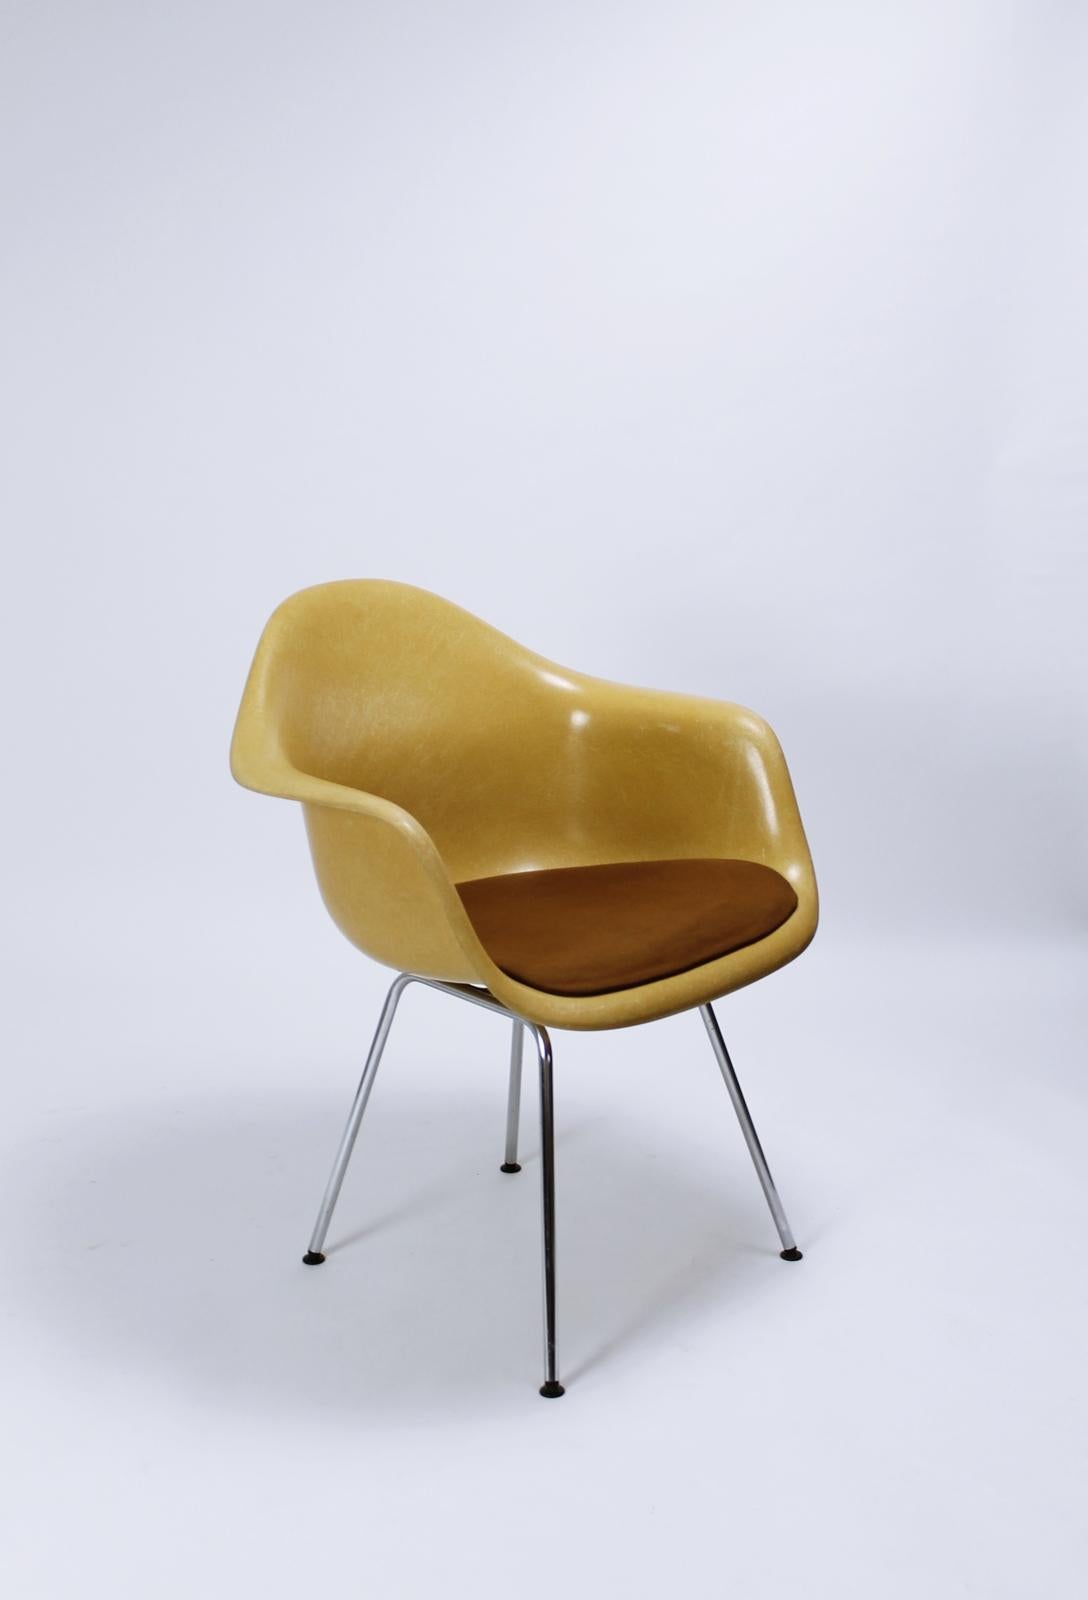 Vintage design

This stunning chairs was designed by Charles & Ray Eames for Herman Miller and was later manufactured by Vitra during the 1960s under the Herman Miller License. The fiberglass shells are mounted on a H-base The light orche fiberglass